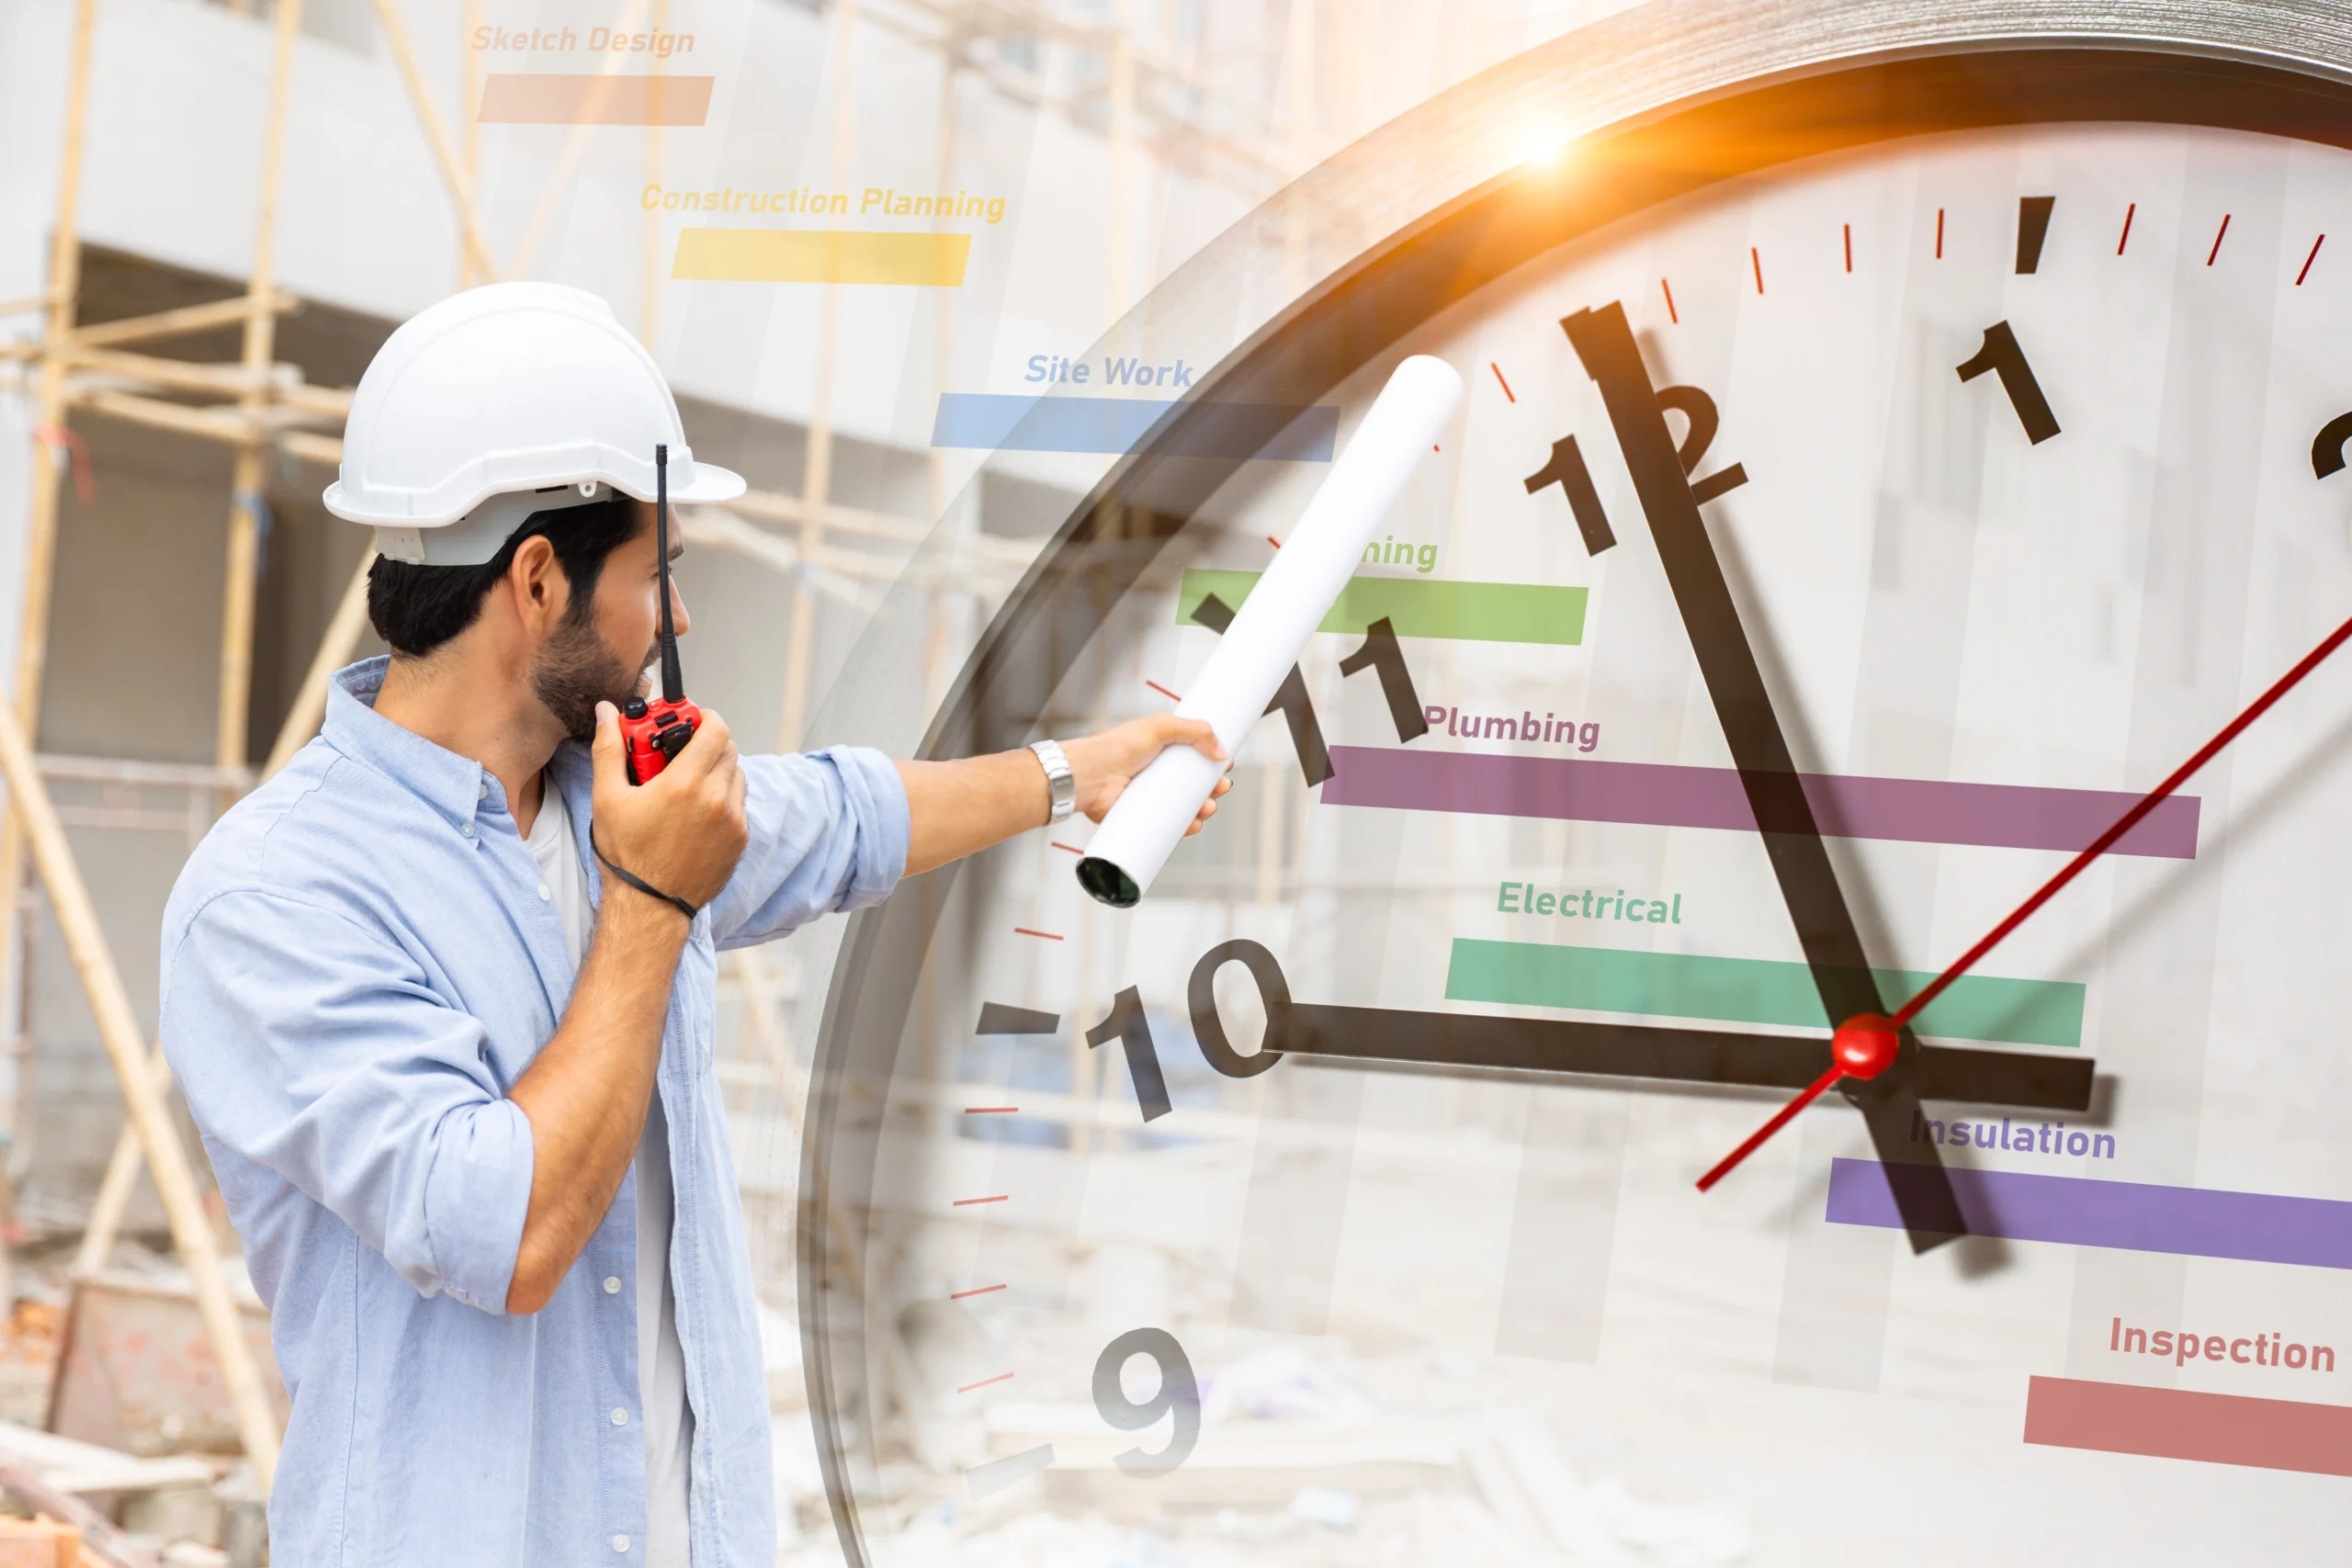 Man in hardhat on walkie talkie and building plans with clock and building phases superimposed